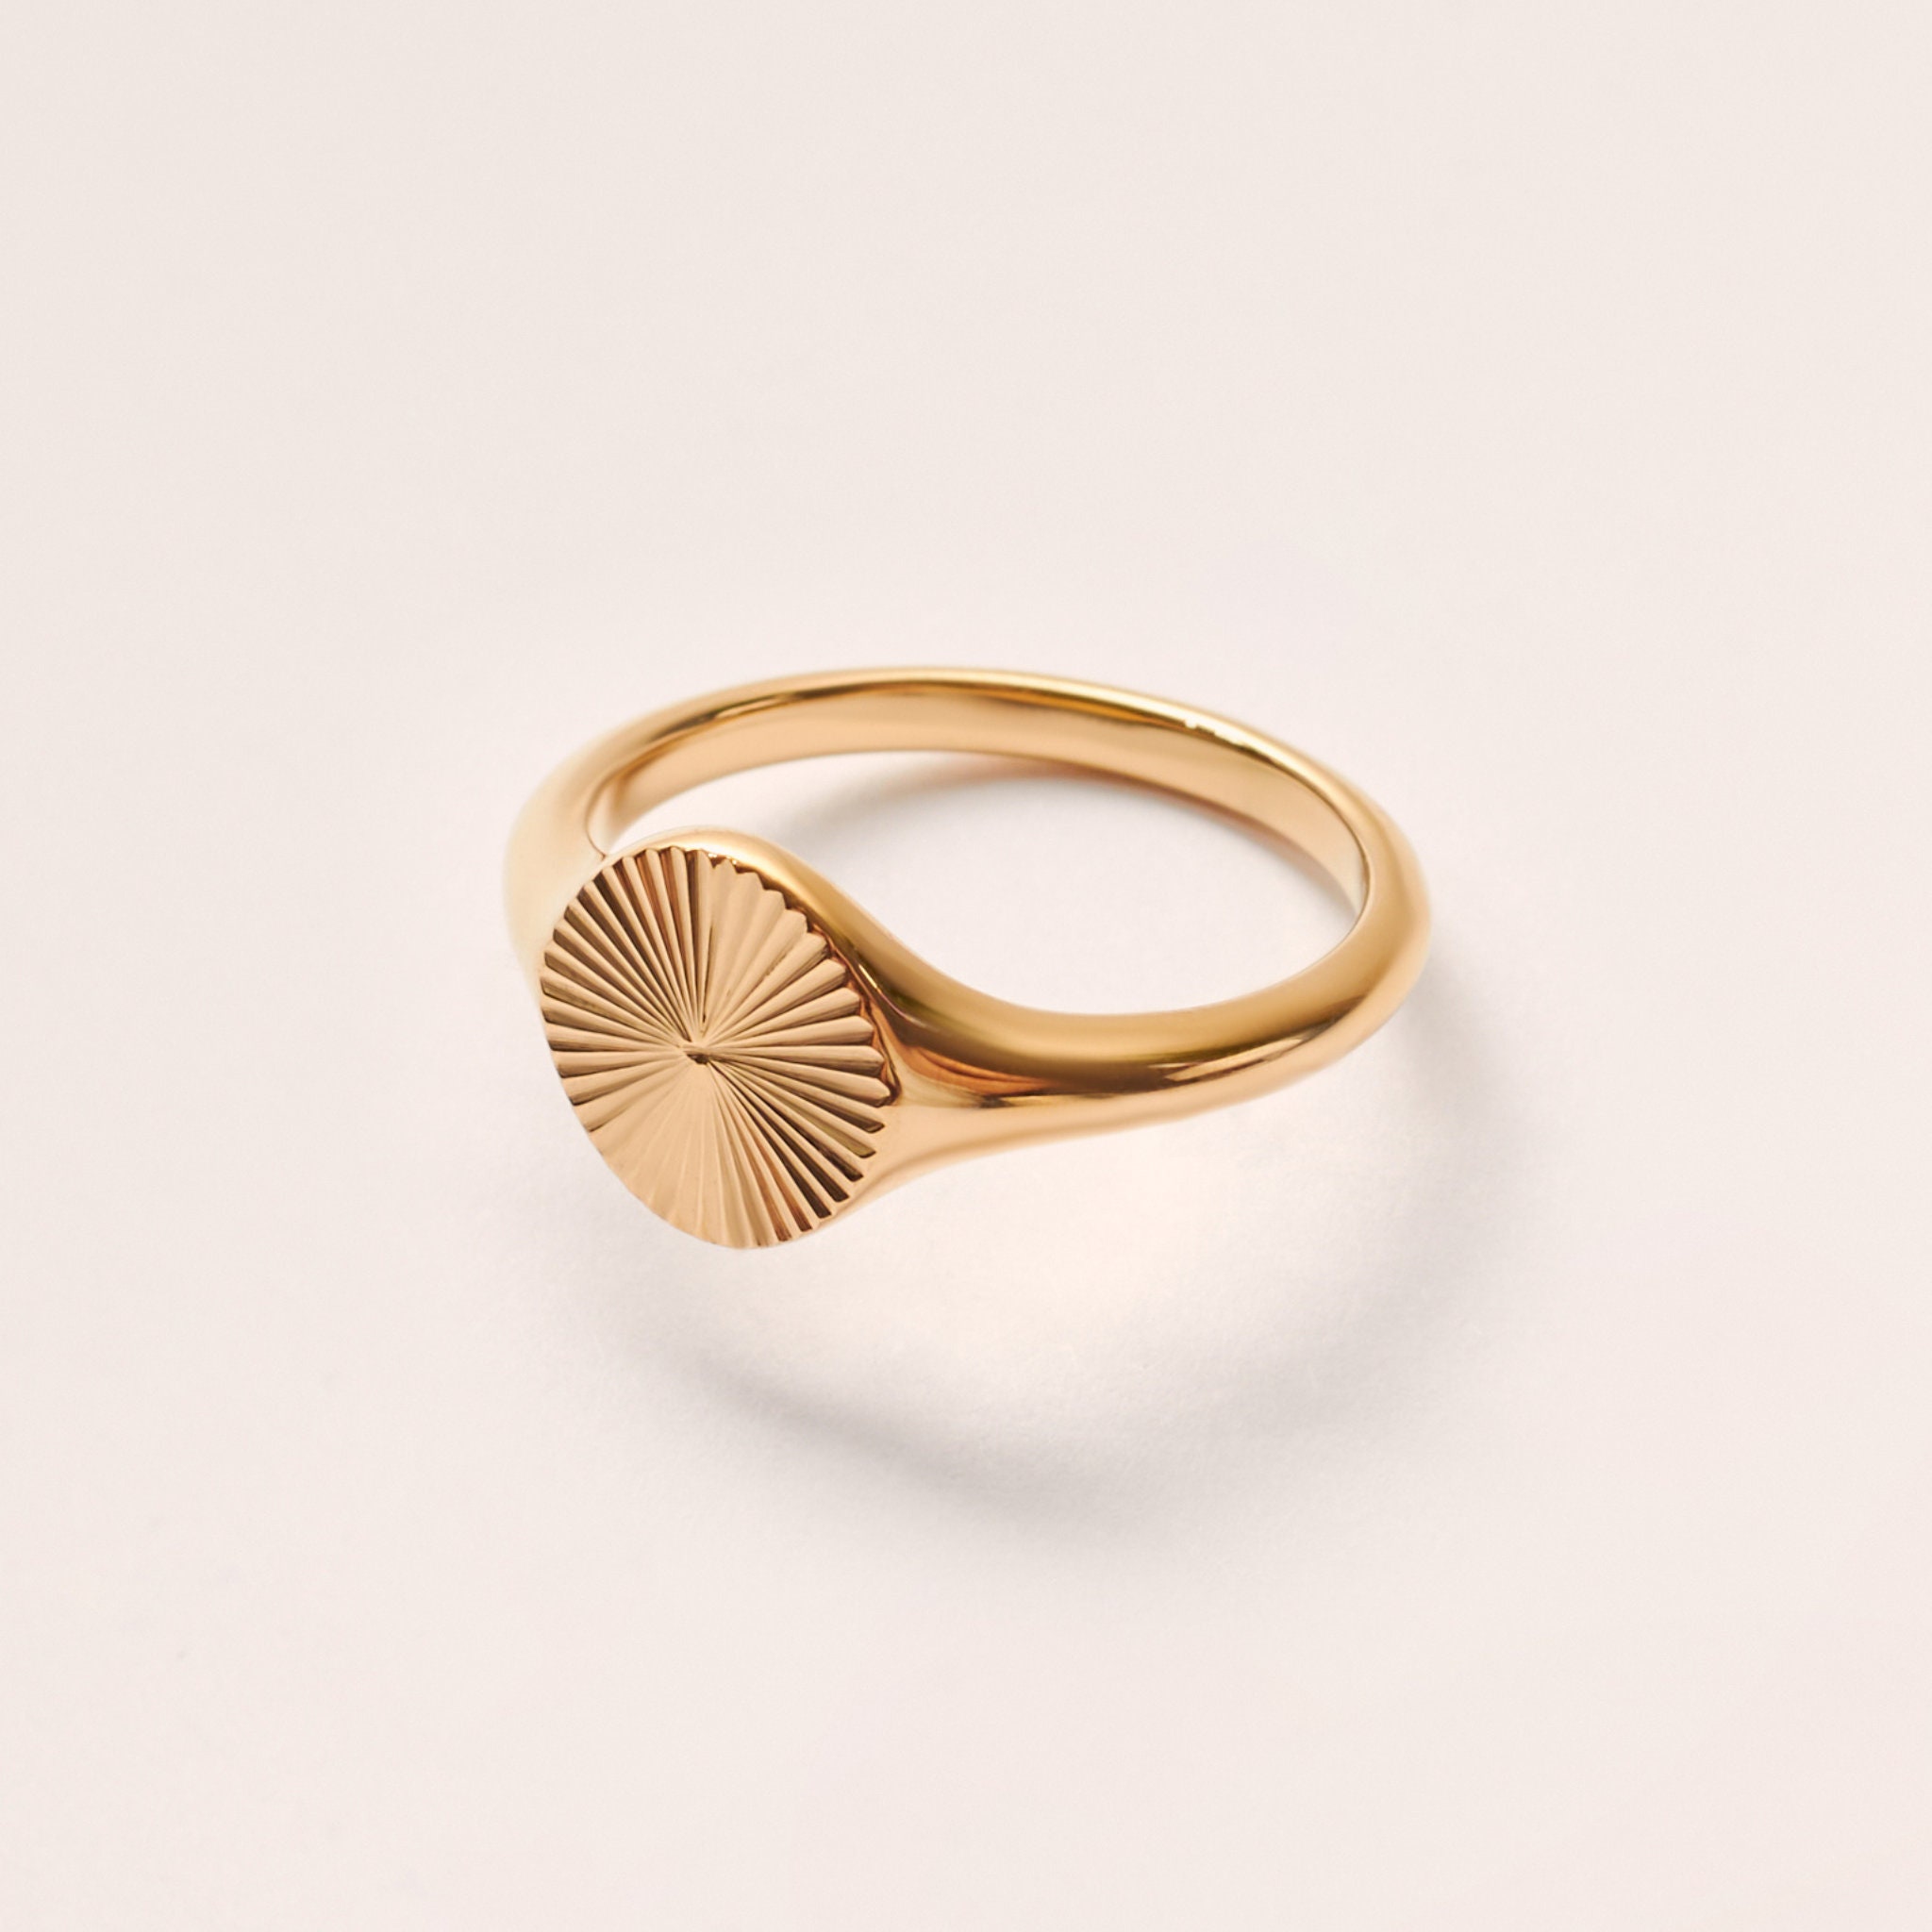 Soleil Signet Ring - Gold Waterproof Stacking 18K Classy Sunshine Sun Delicate Gift For Her Black Friday